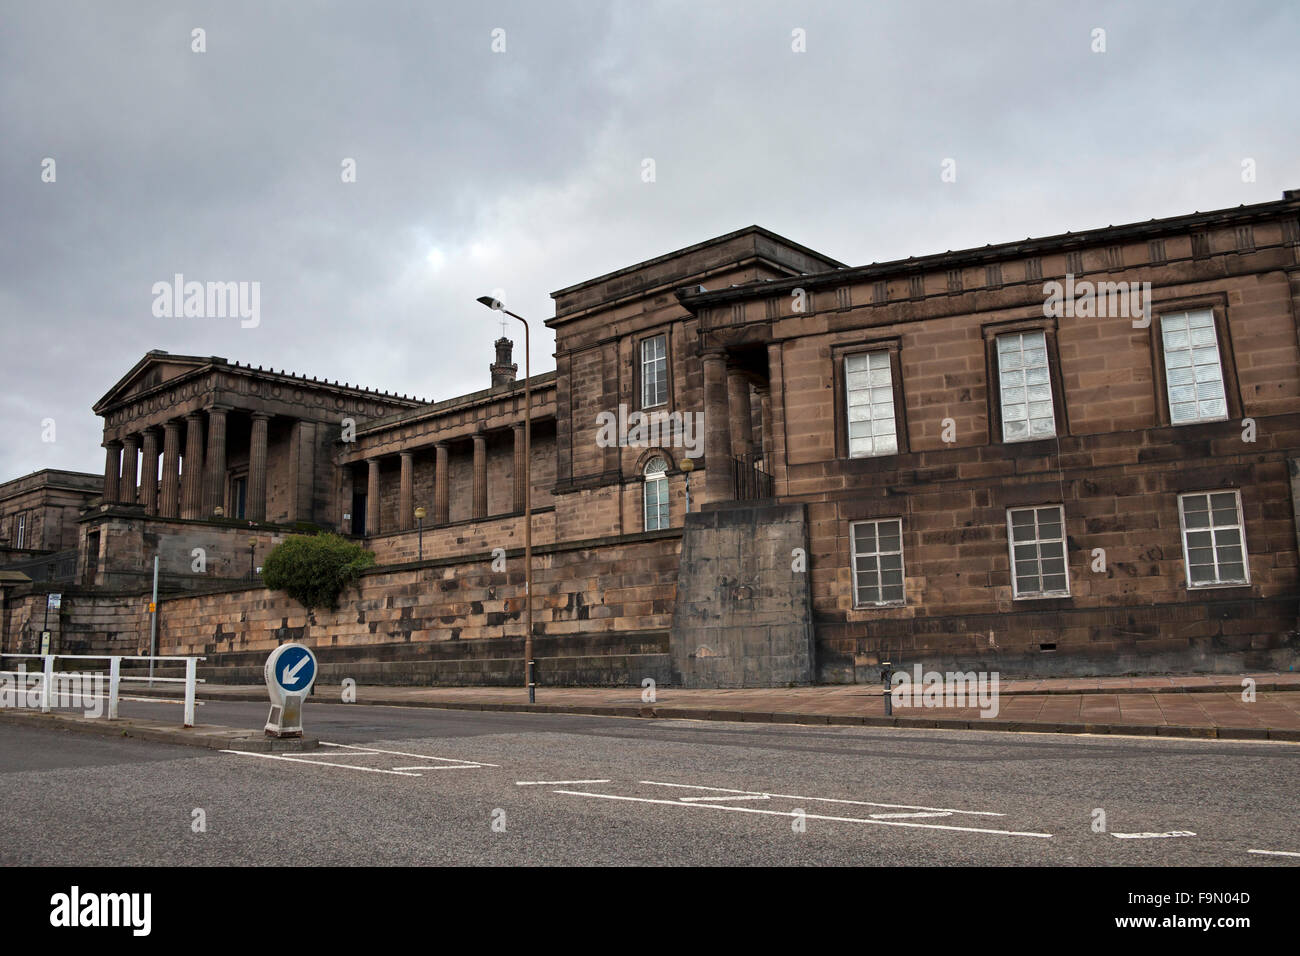 Edinburgh, Scotland, UK, 17 Dec. 2015  Edinburgh Councillors have rejected plans to turn the former Royal High School building into a luxury hotel. They heard presentations both in favour and against the £75 million project on whether to approve the plans. Heritage watchdogs warned Edinburgh city’s planning committee that they would be making the most important decision that they would ever take.  The controversial development proposed by The Urbanist Hotels and Duddingston House Properties. Stock Photo